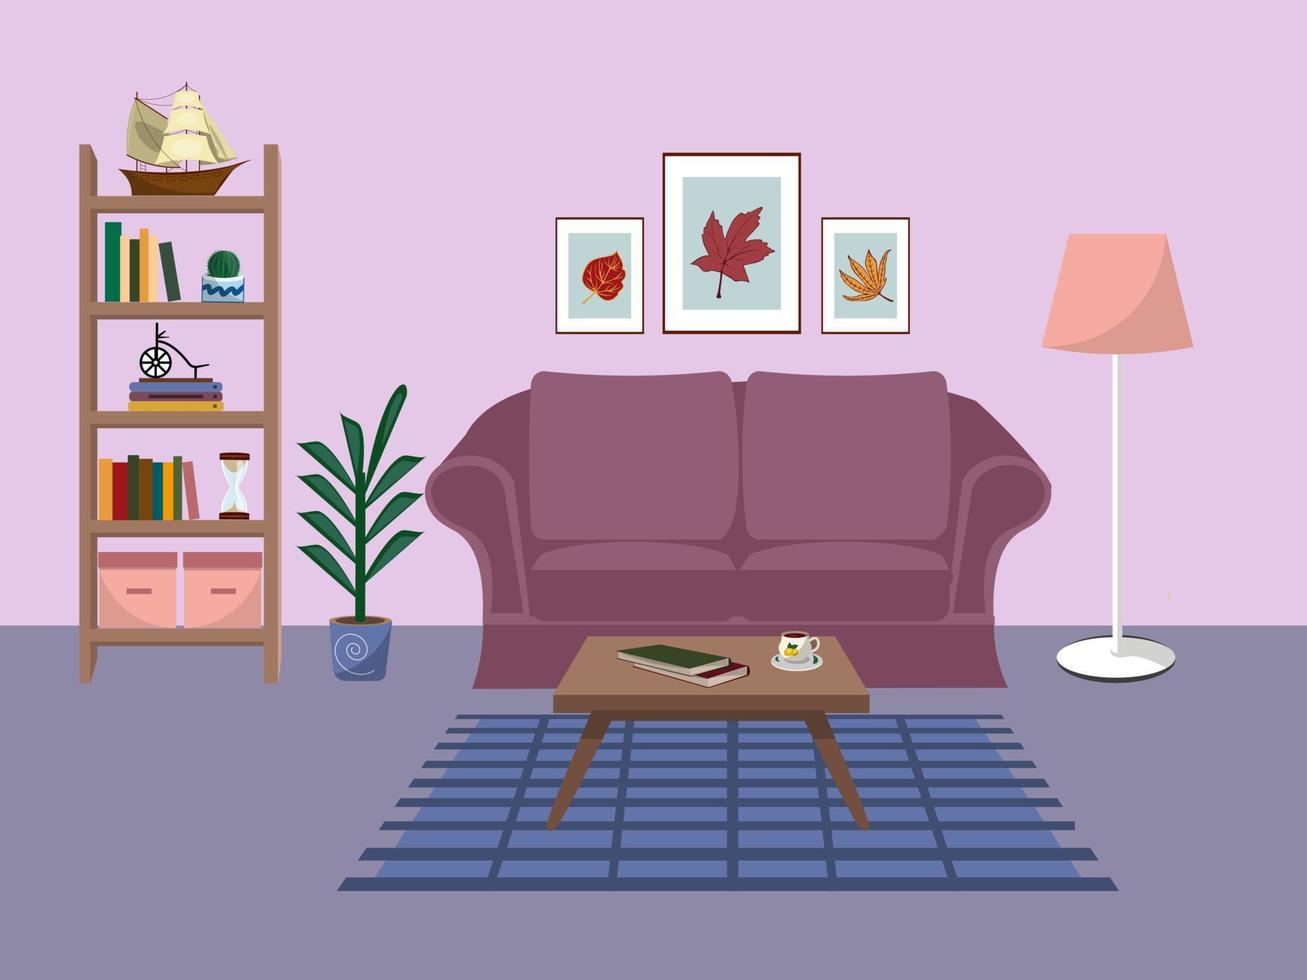 Living room interior with comfortable sofa, bookcase, house plants and home decorations. Flat cartoon vector illustration